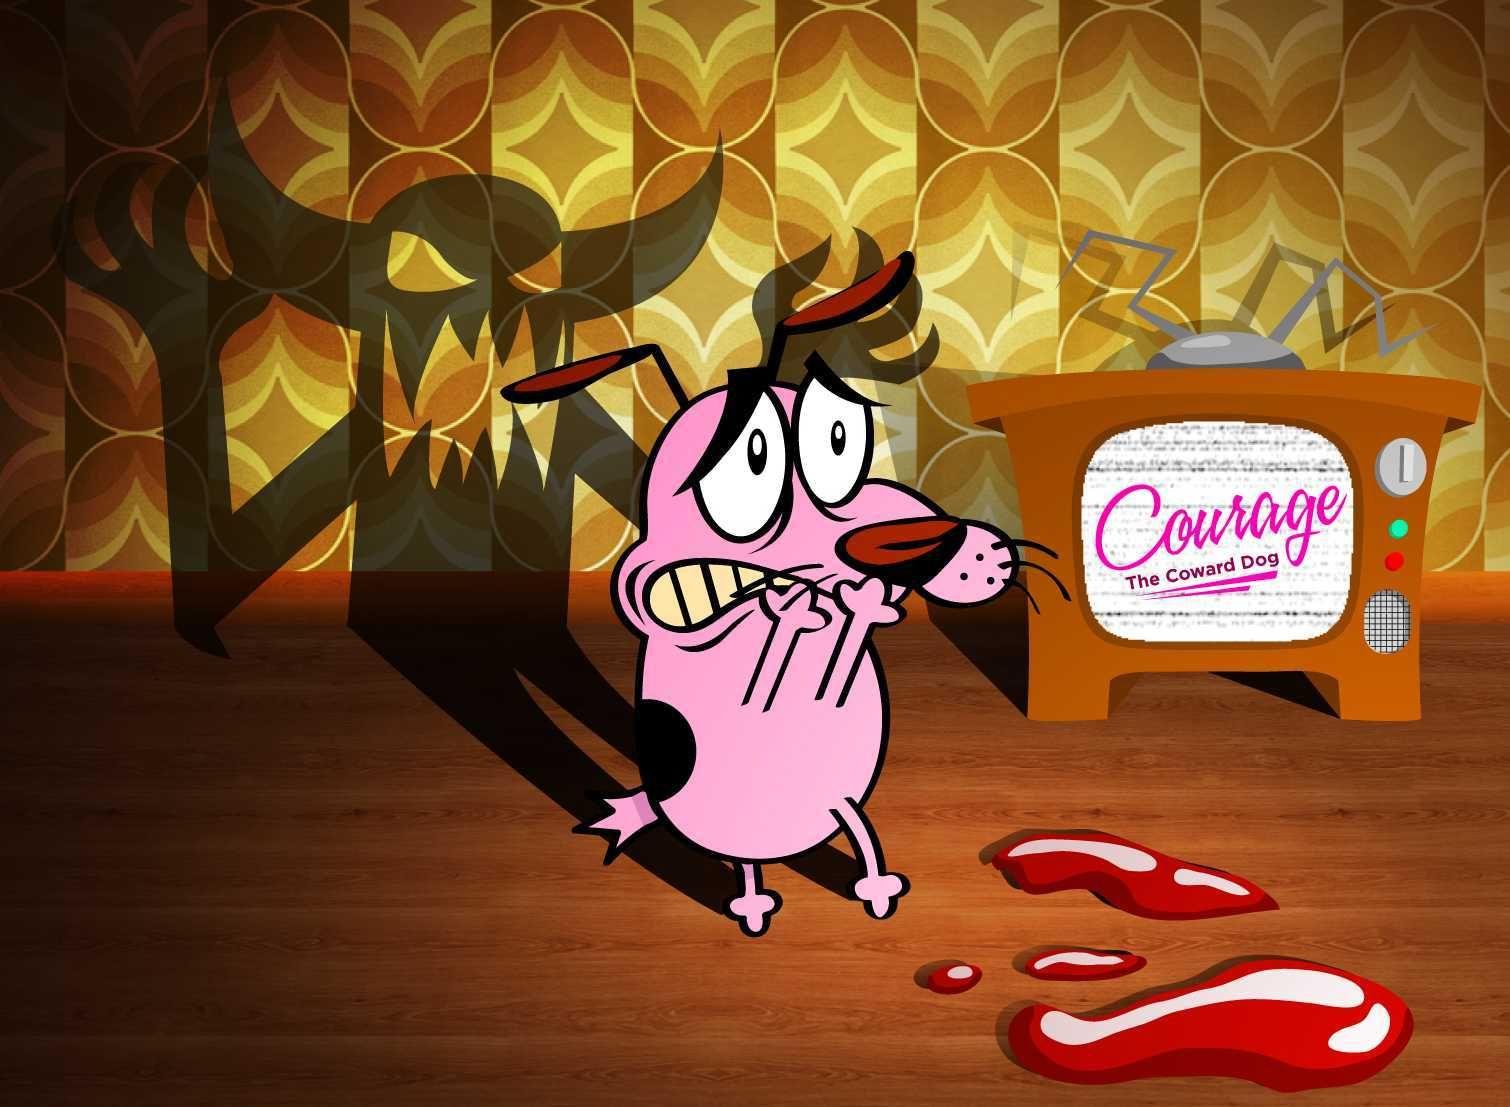 Wide Courage The Cowardly Dog Wallpaper, HDQ Courage The Cowardly